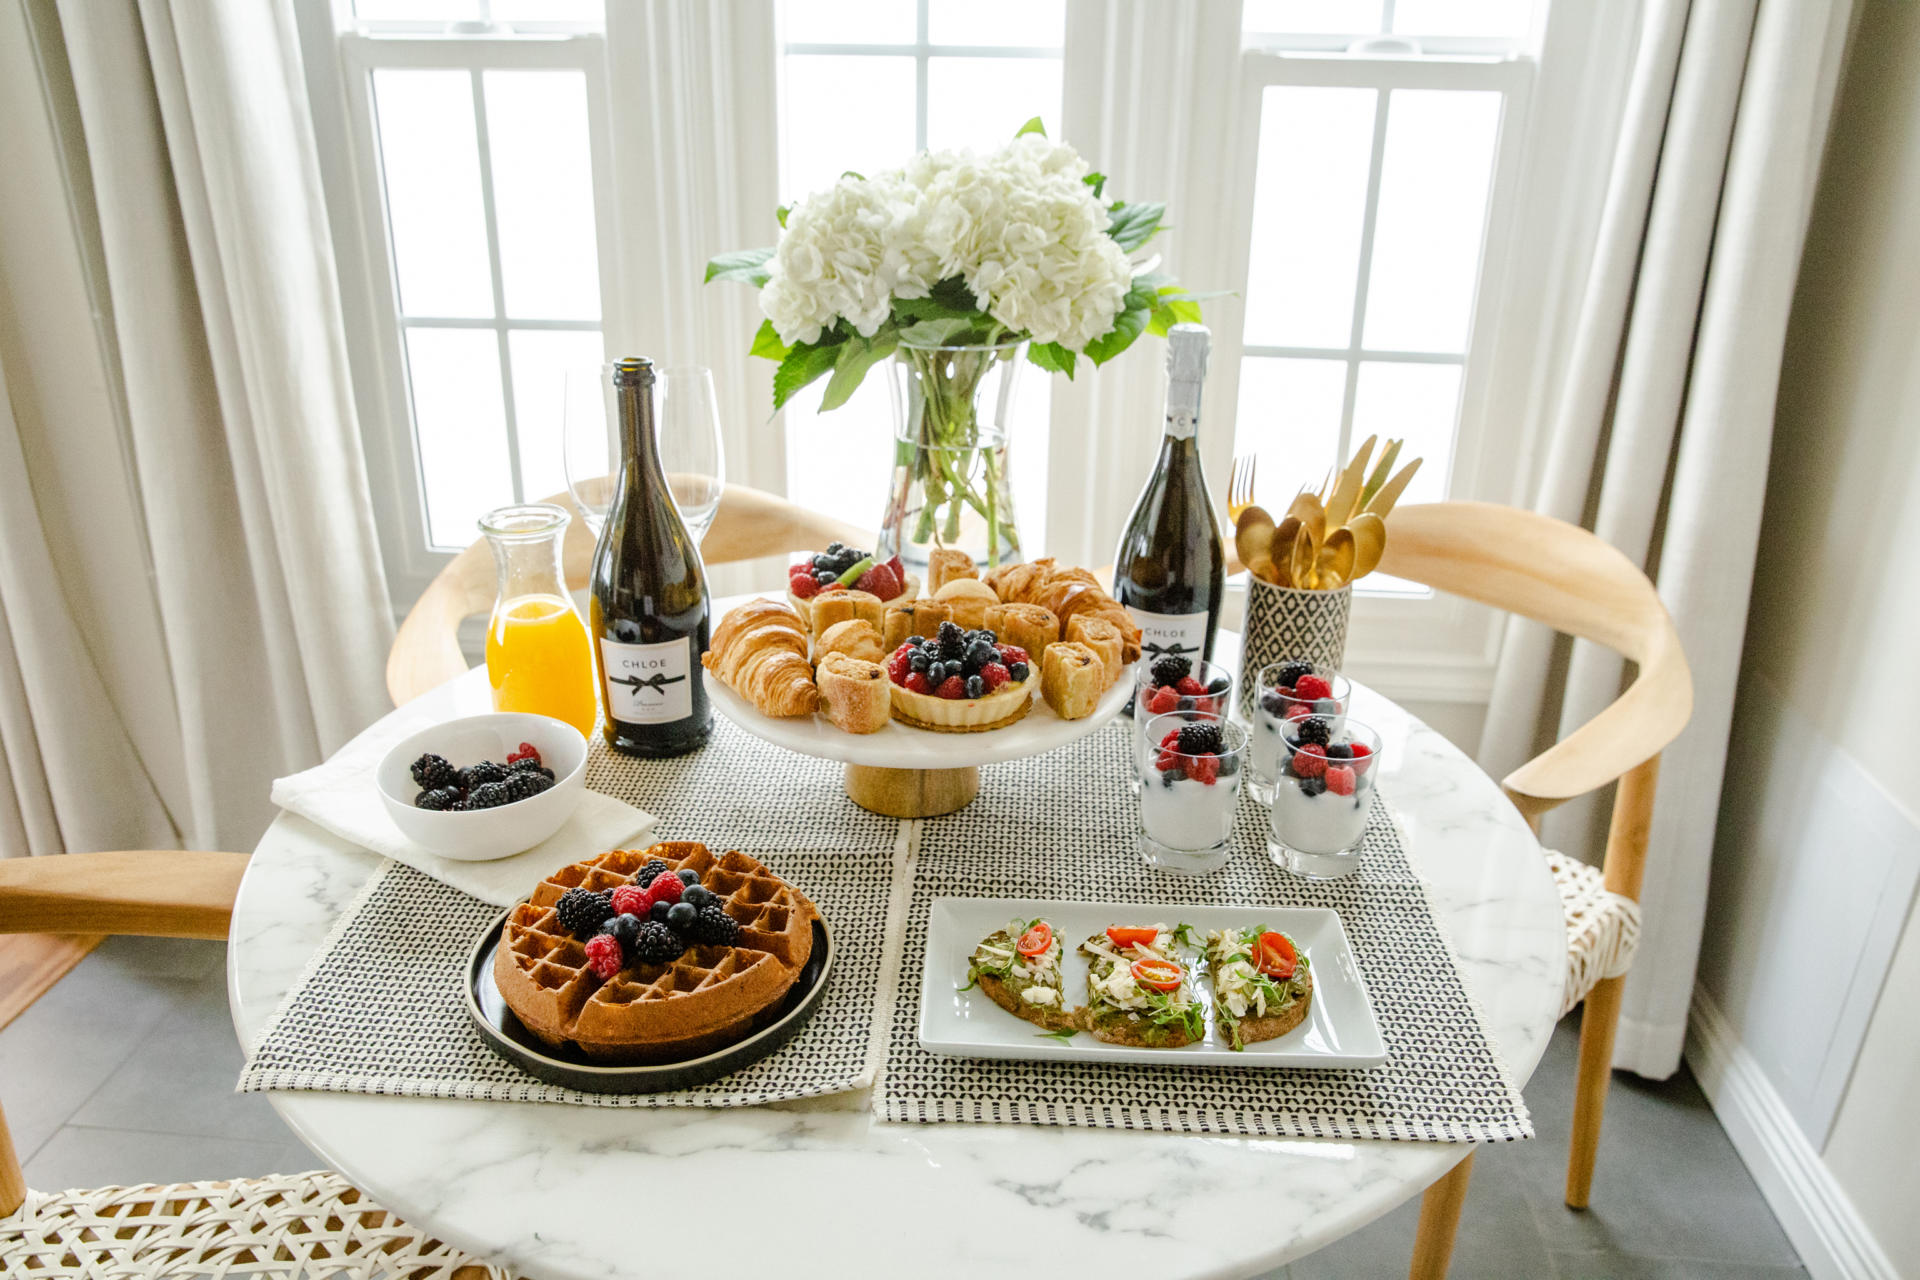 Everything You Need to Host a Beautiful Brunch